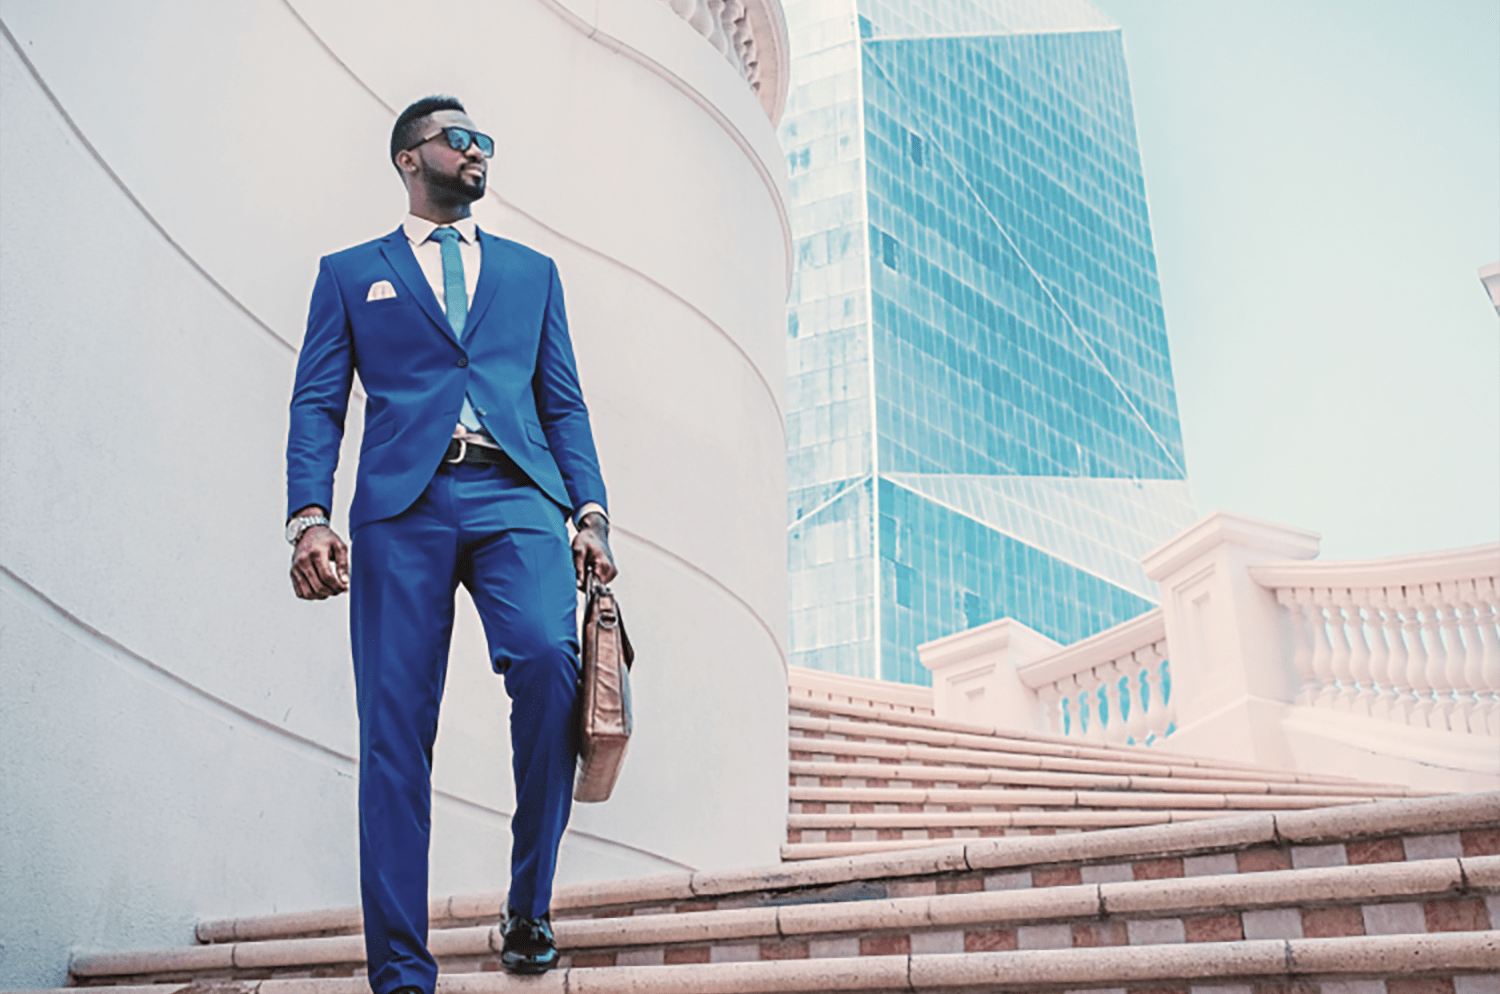 An african man in a blue suit and tie walking down a stairs in front of a skyscraper